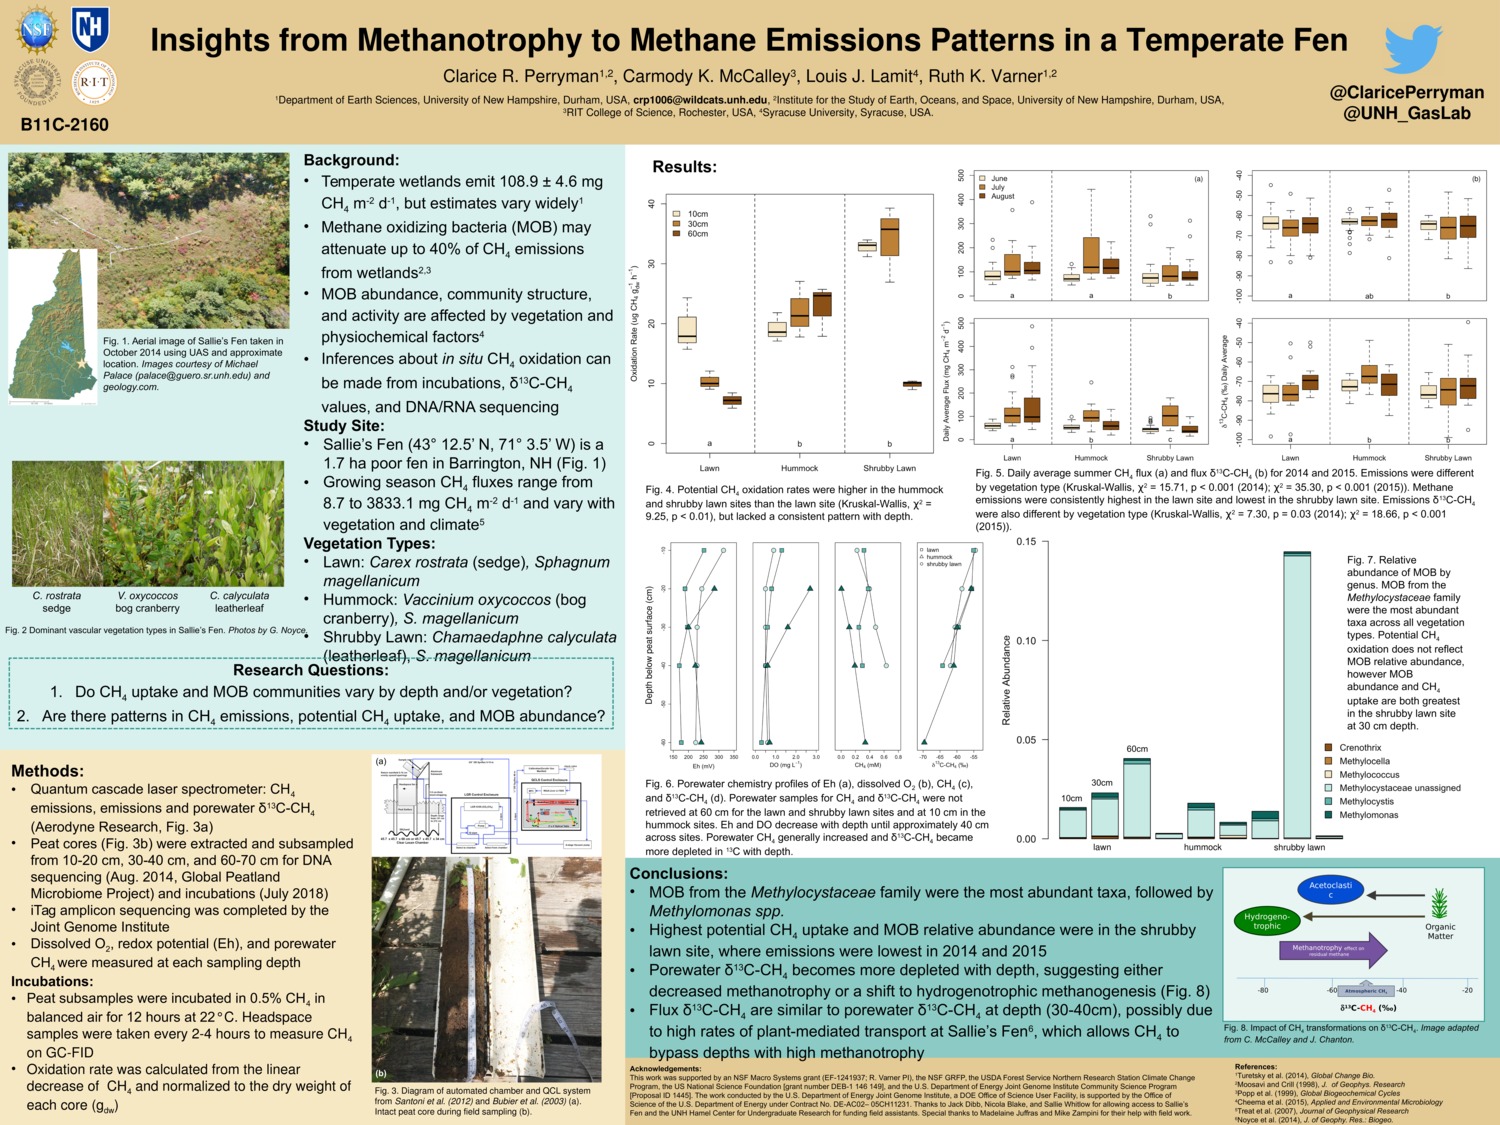 Insights From Methanotrophy To Methane Emissions Patterns In A Temperate Fen by crp1006